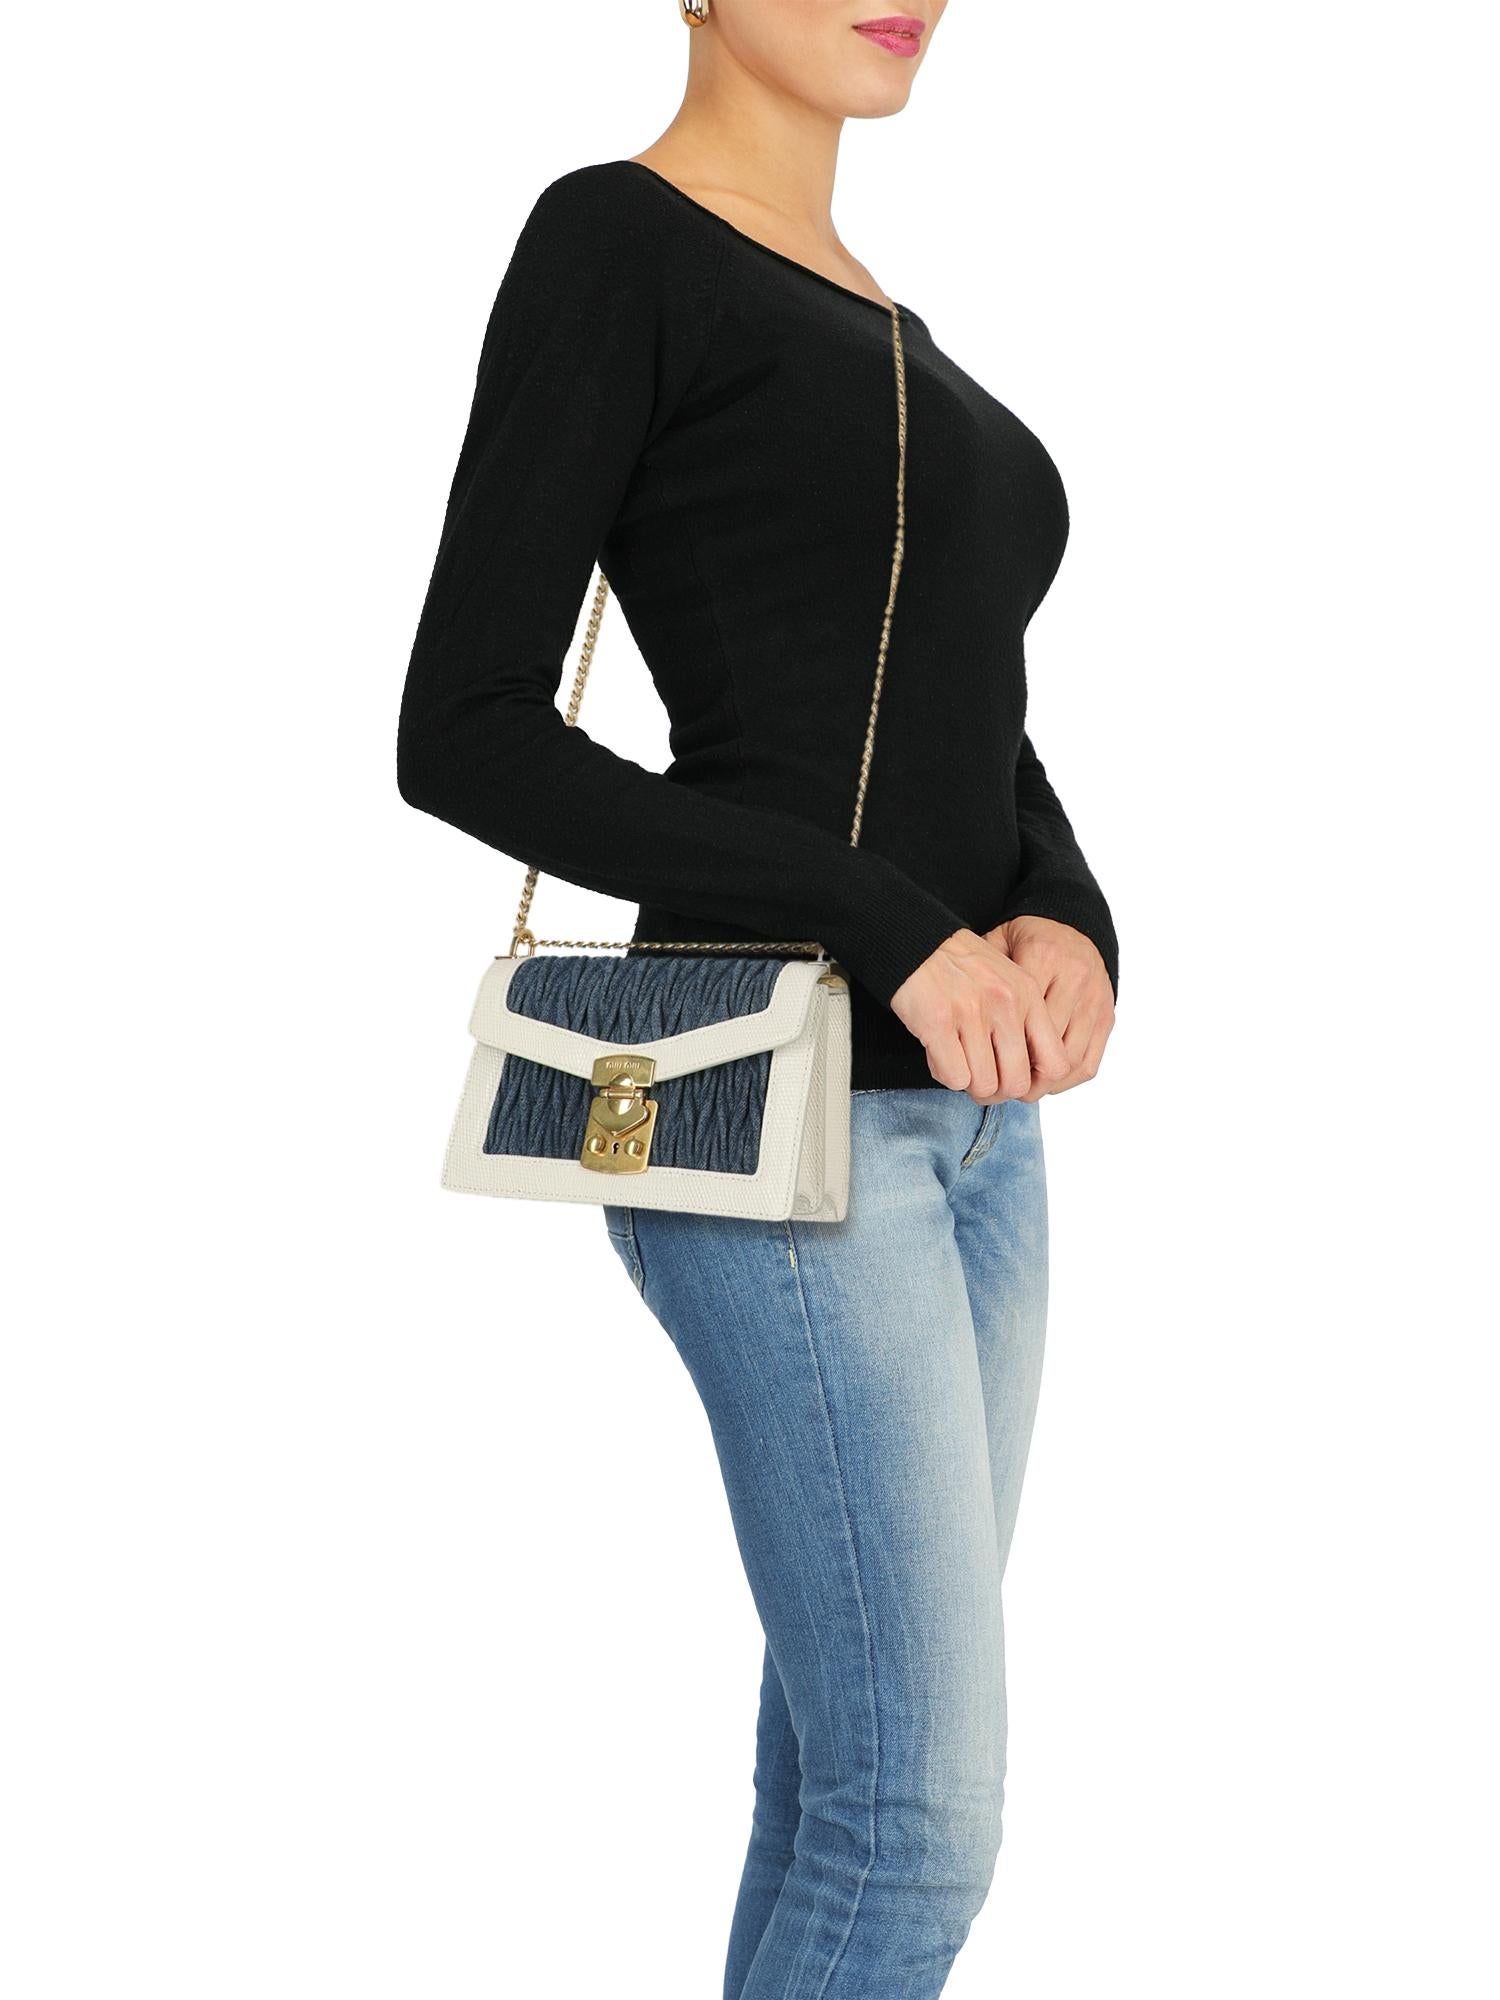 Cross body bag, leather, fabric, snake print, front logo, jeans, snap closure, gold-tone hardware, internal zipped pocket, internal pocket, multiple internal compartments, day bag

Includes:
- Dust bag 
- Product care 

Product Condition: